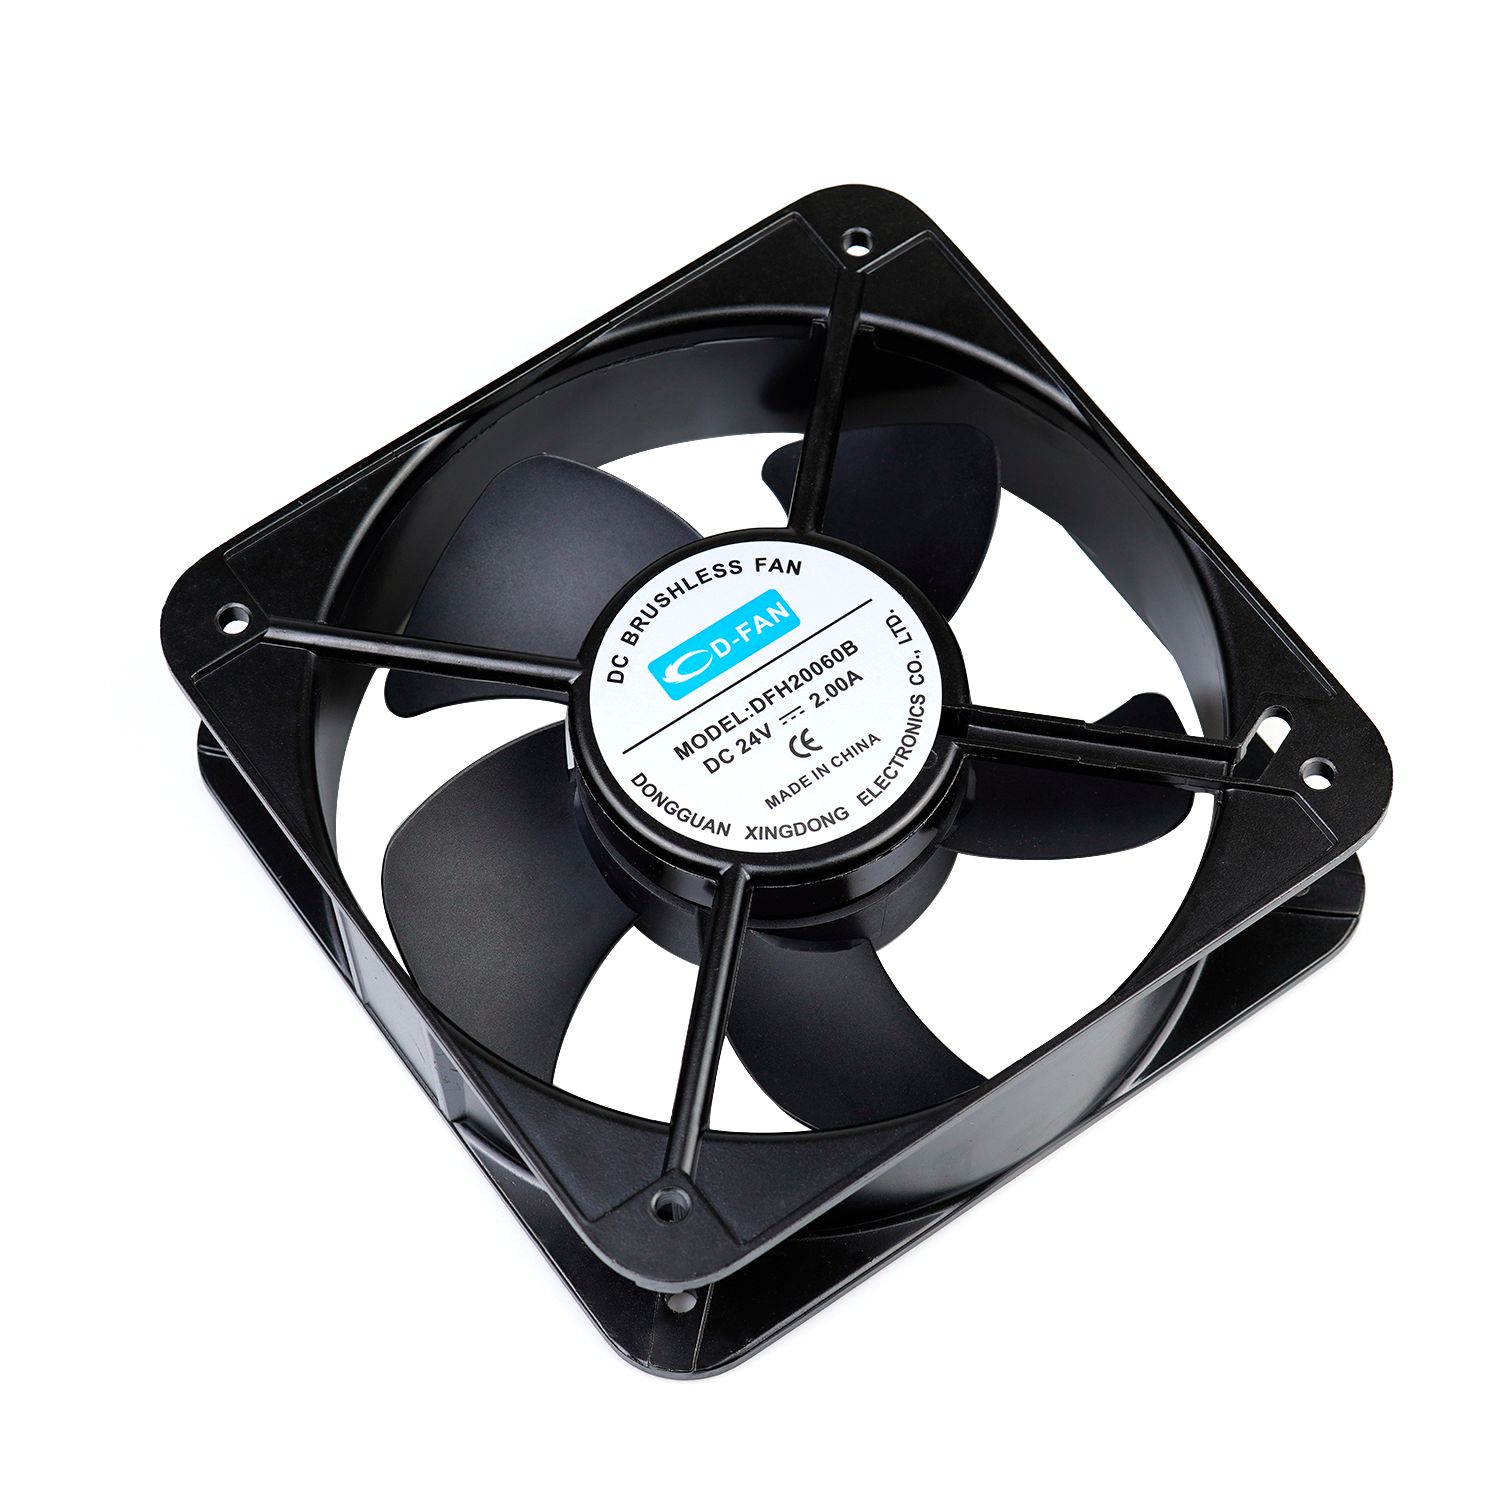 7 Reasons to Choose a DC Cooling Fan for Your Home or Business